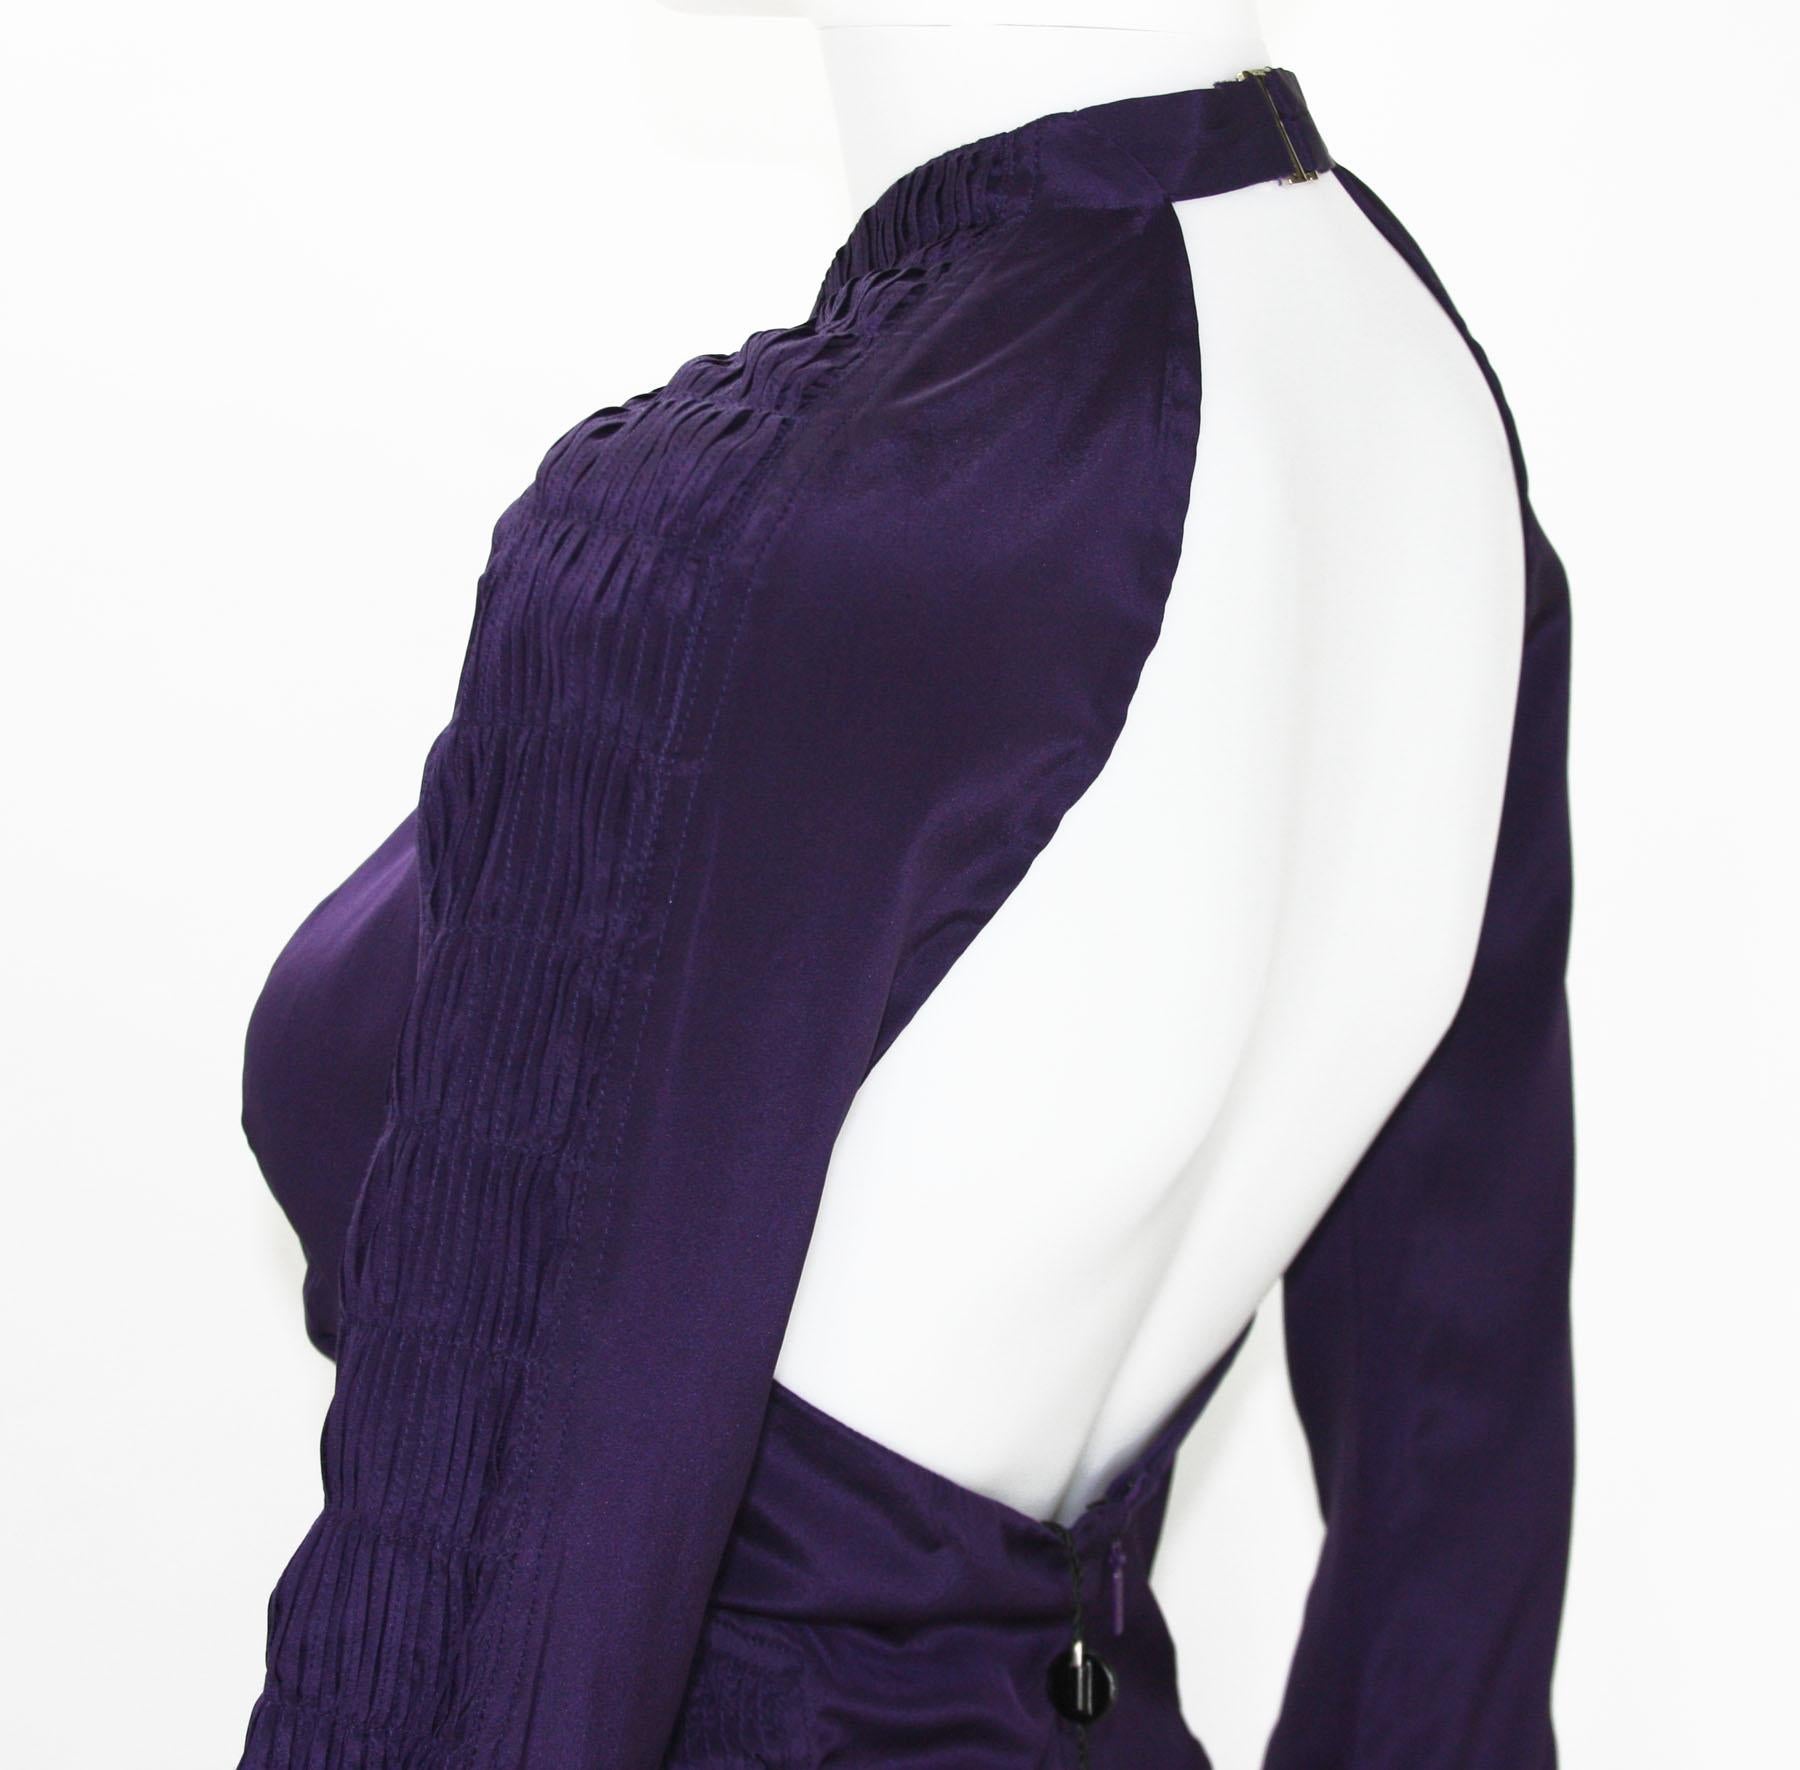 Women's New Tom Ford for Gucci S/S 2004 Deep Purple Silk Plunging Backless Mini Dress 38